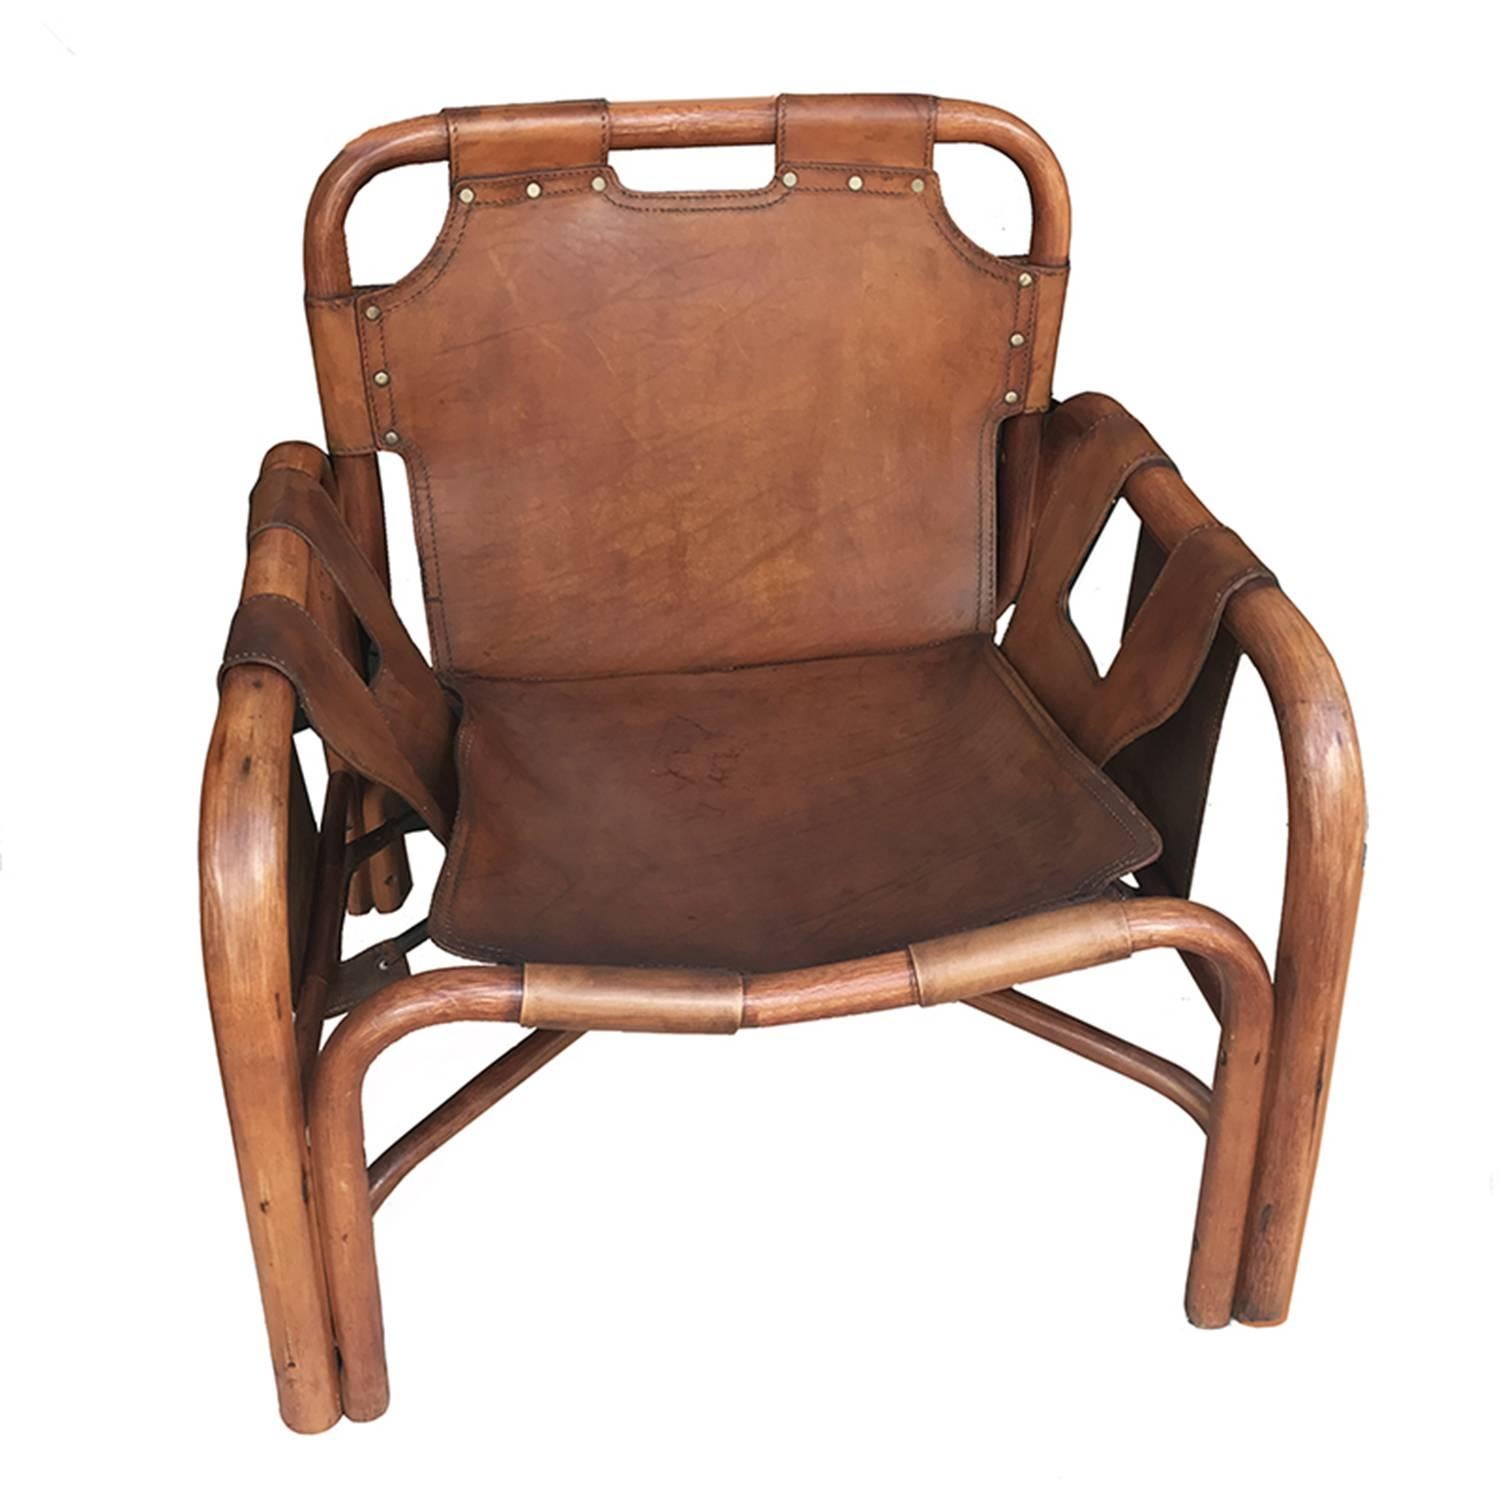 Italian Mid-Century Modern rattan and stitched leather lounge chair by Bonacina featuring elegant leather strap construction in the midst of an open framework.